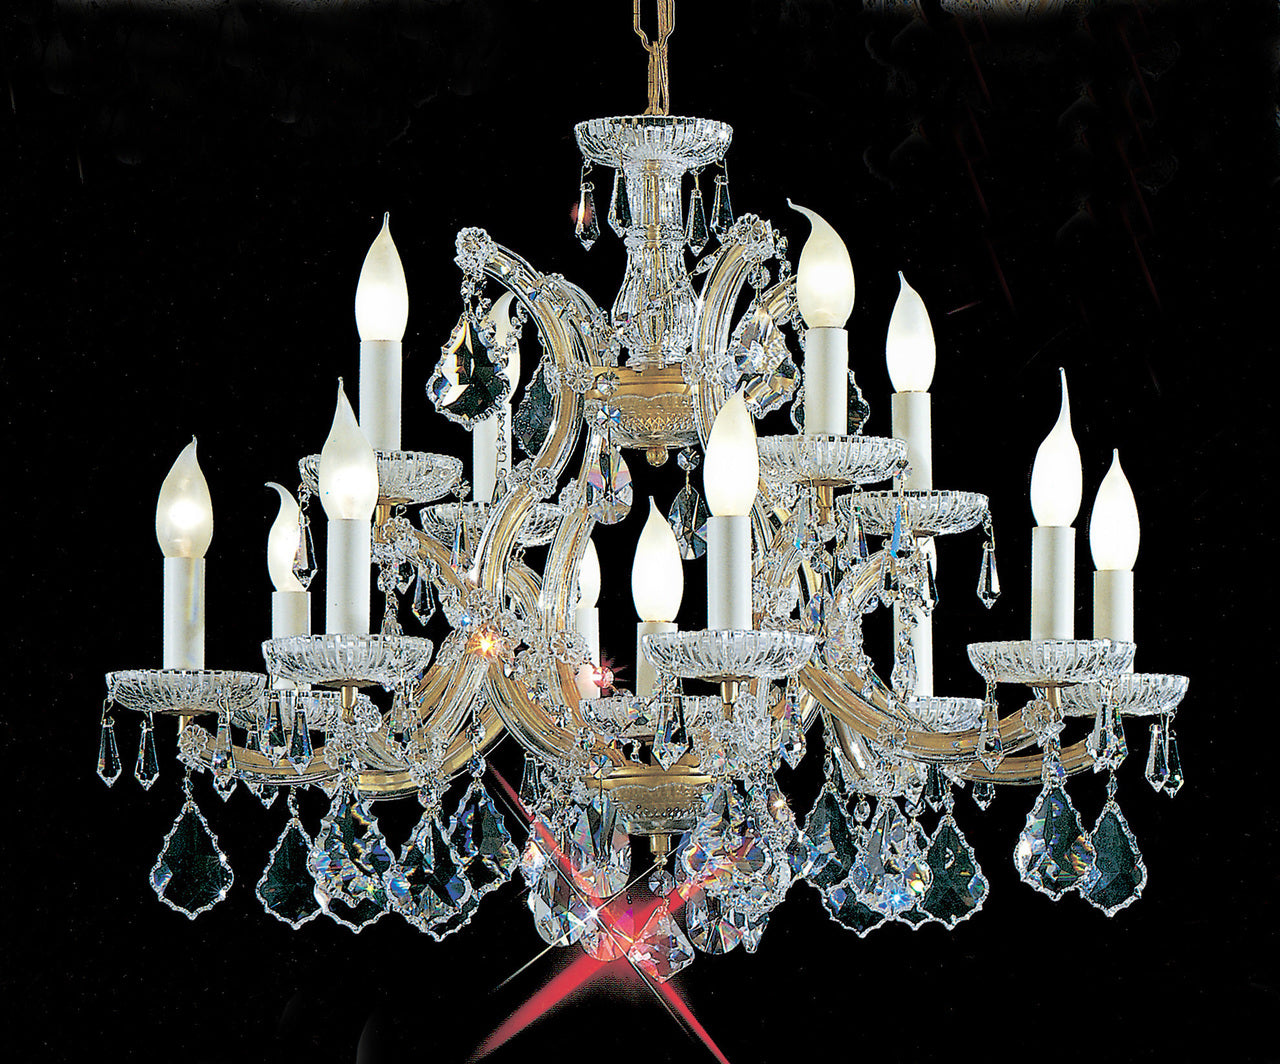 Classic Lighting 8113 OWG S Maria Theresa Traditional Crystal Chandelier in Olde World Gold (Imported from Italy)